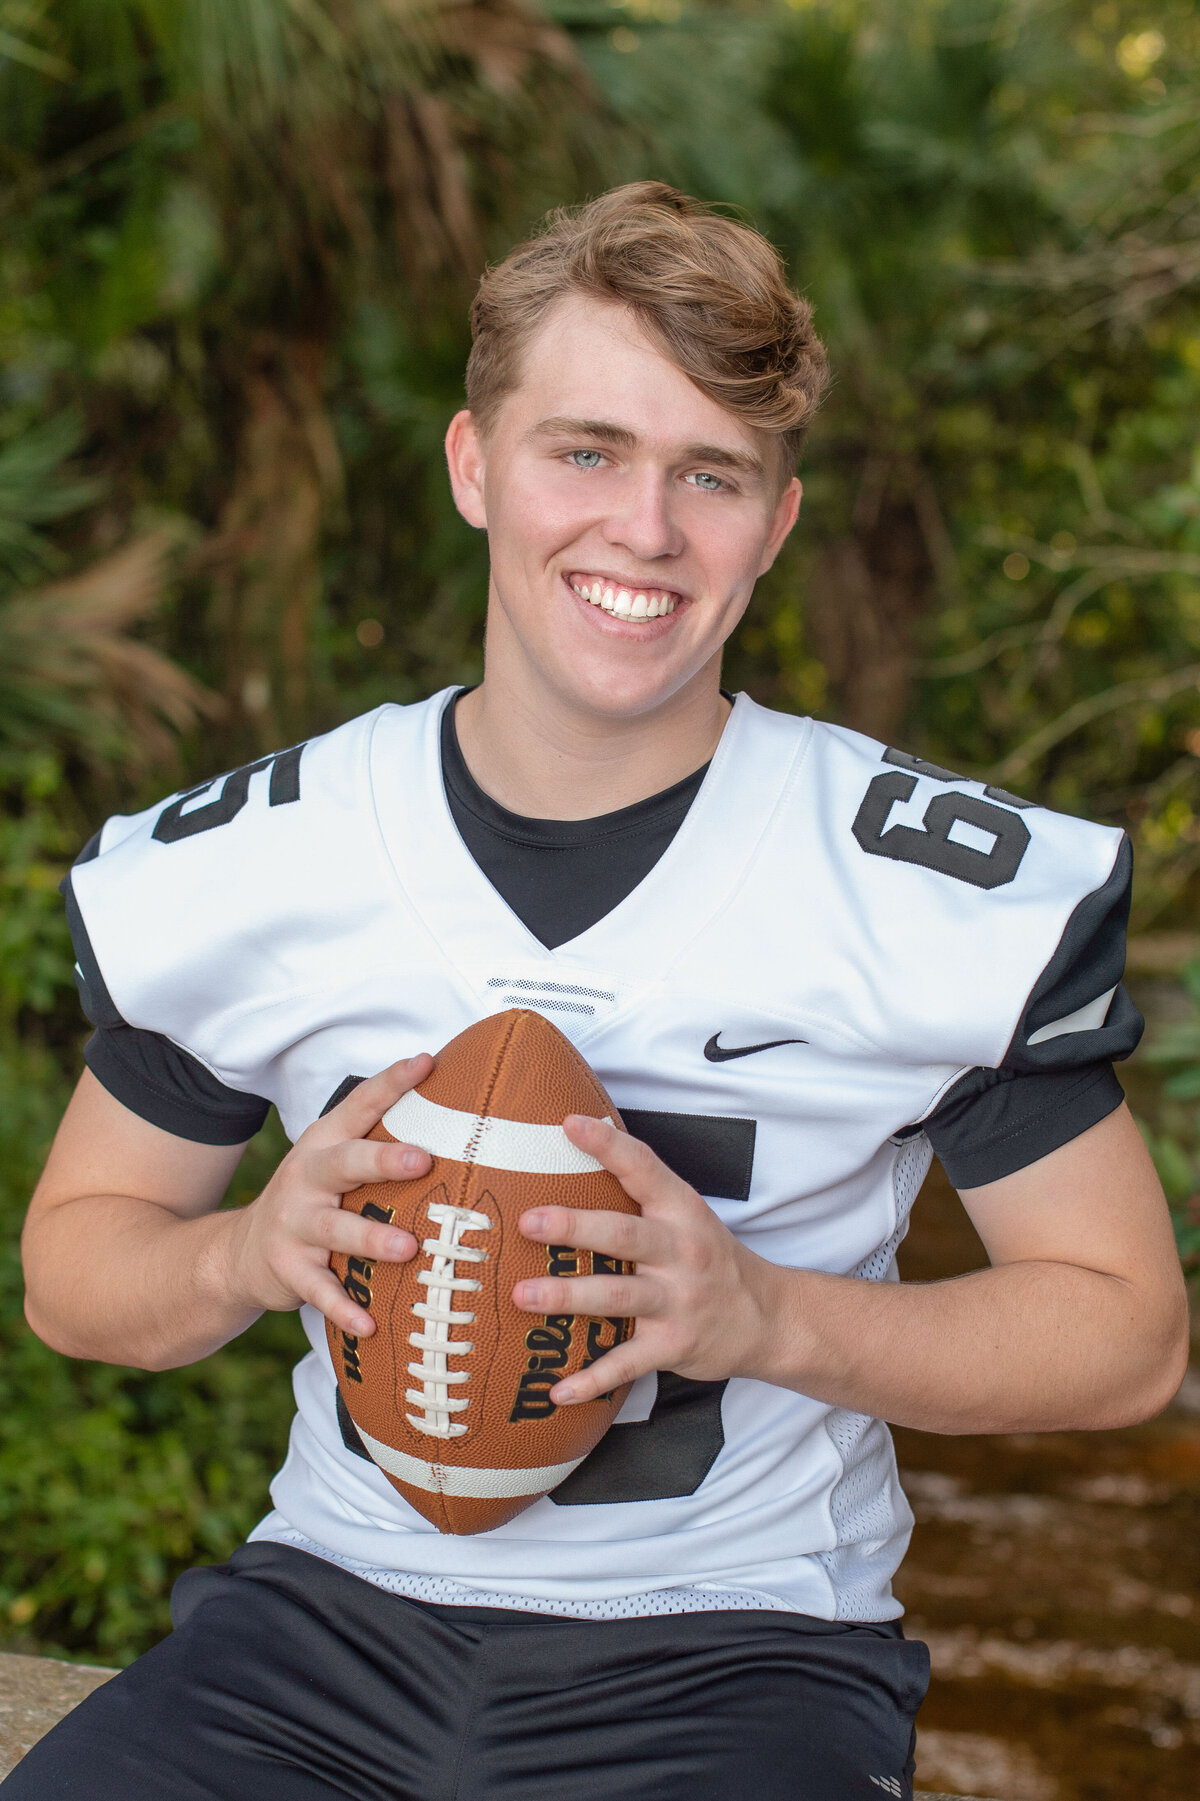 High school senior boy wearing a football jersey and hold a football sits on a bench and smiles at the camera.